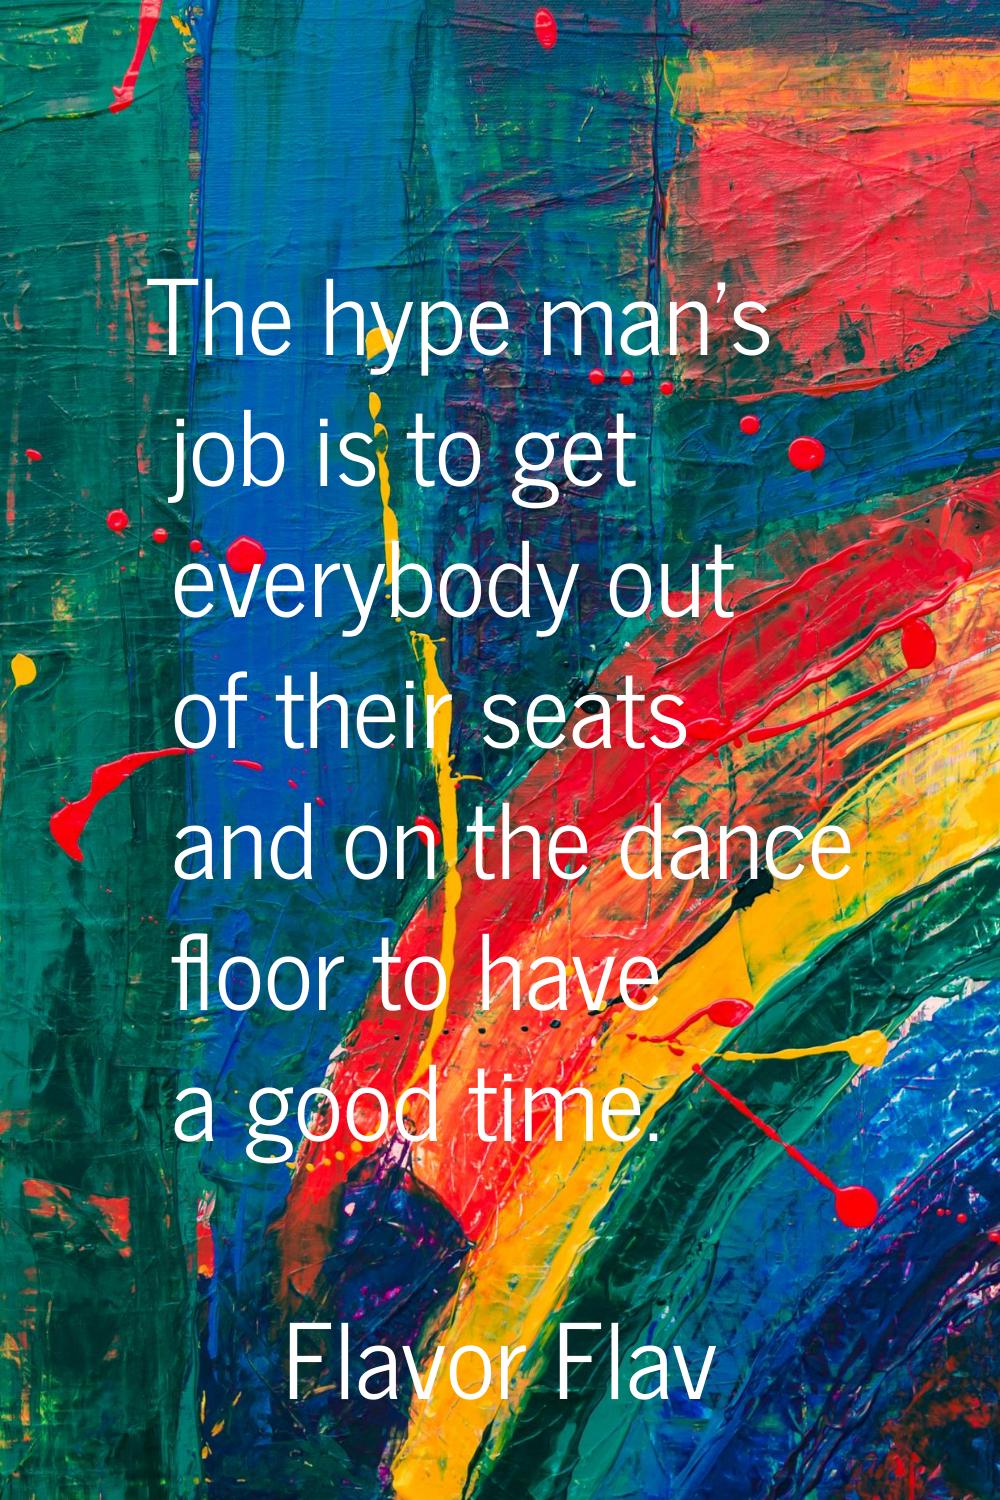 The hype man's job is to get everybody out of their seats and on the dance floor to have a good tim